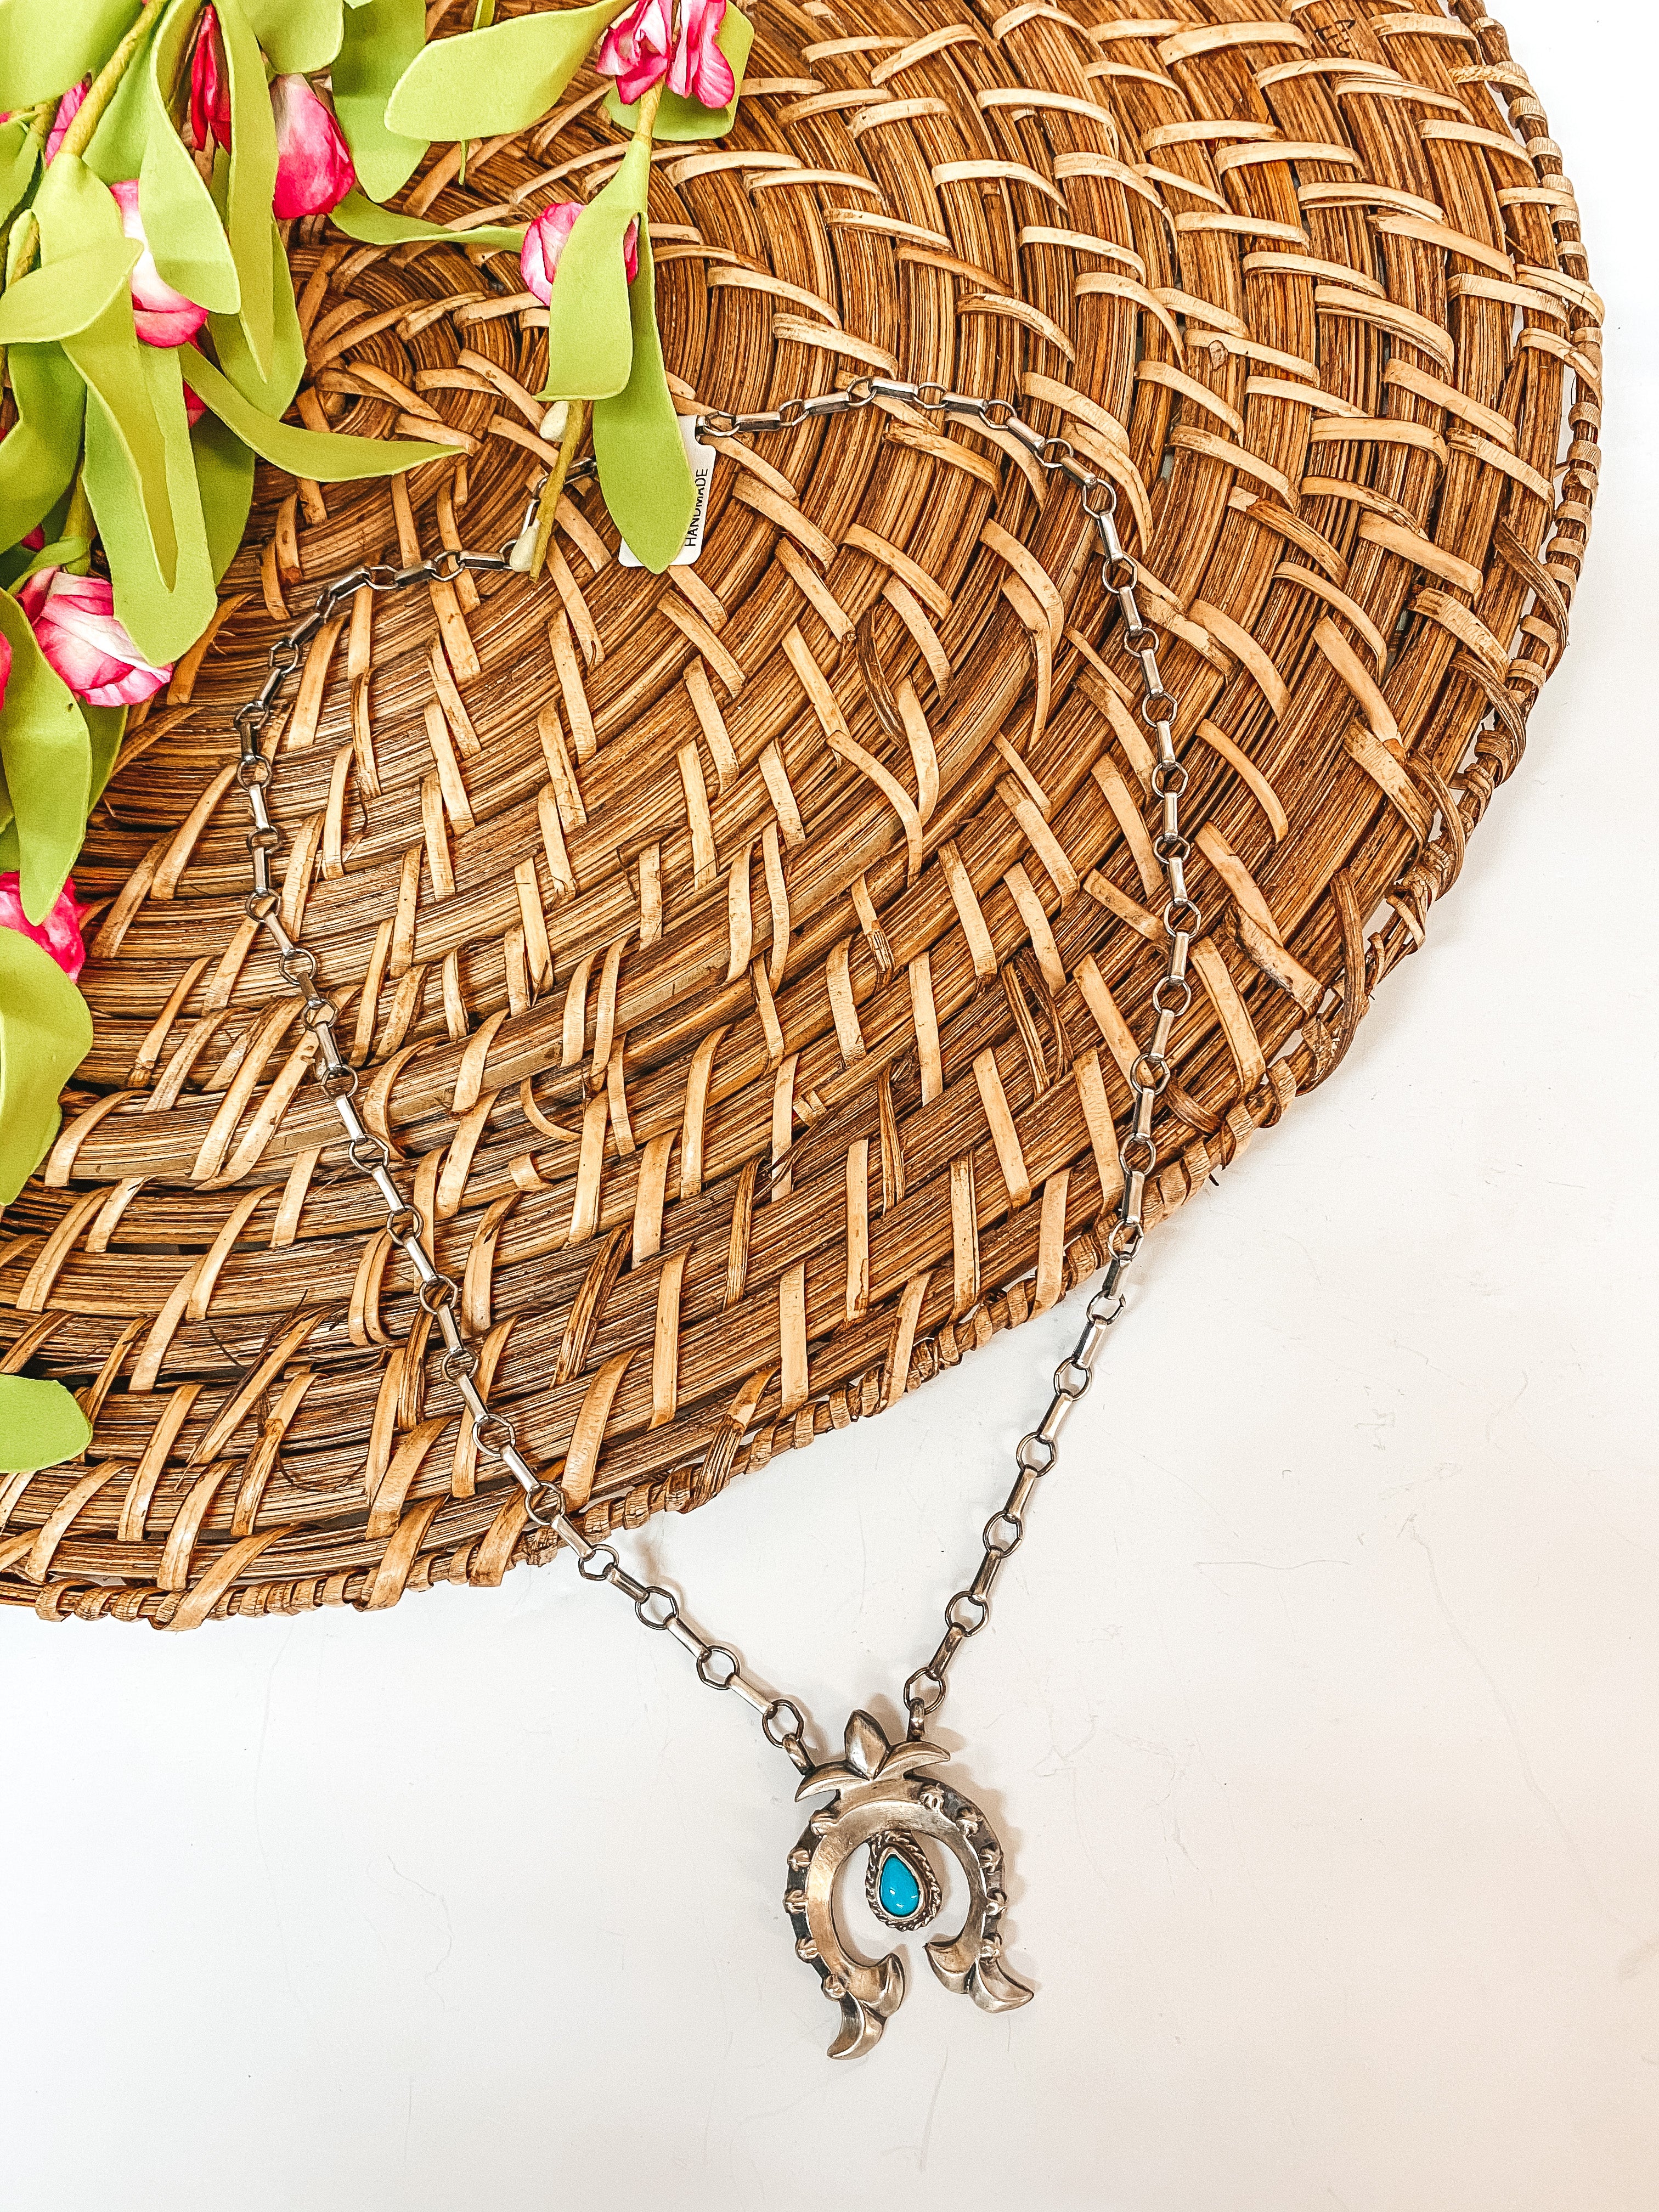 Annie Spencer | Navajo Handmade Sterling Silver Chain Necklace with Naja Pendant with Turquoise Stud - Giddy Up Glamour Boutique